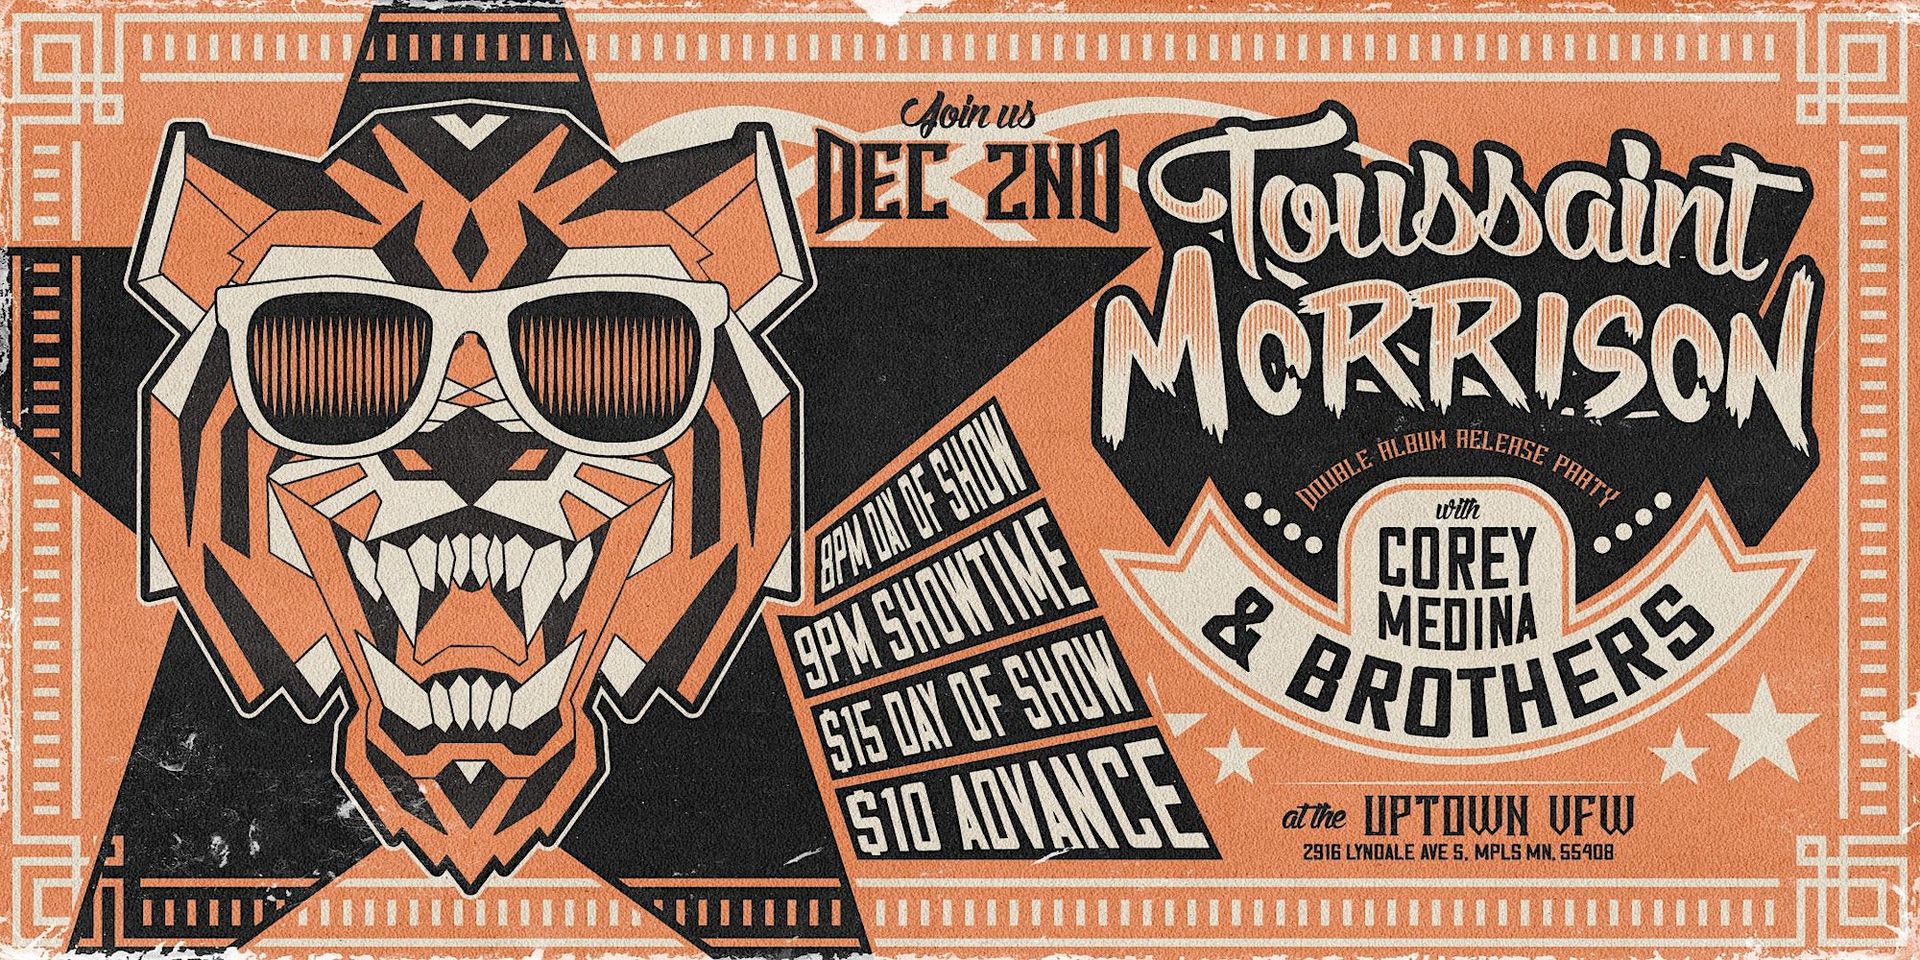 Toussaint Morrison Double Album Release with ​Corey Medina & The Brothers Friday, December 2 James Ballentine "Uptown" VFW Post 246 Doors 8:00pm :: Music 9:00pm :: 21+ $10 ADV / $15 DOS NO REFUNDS